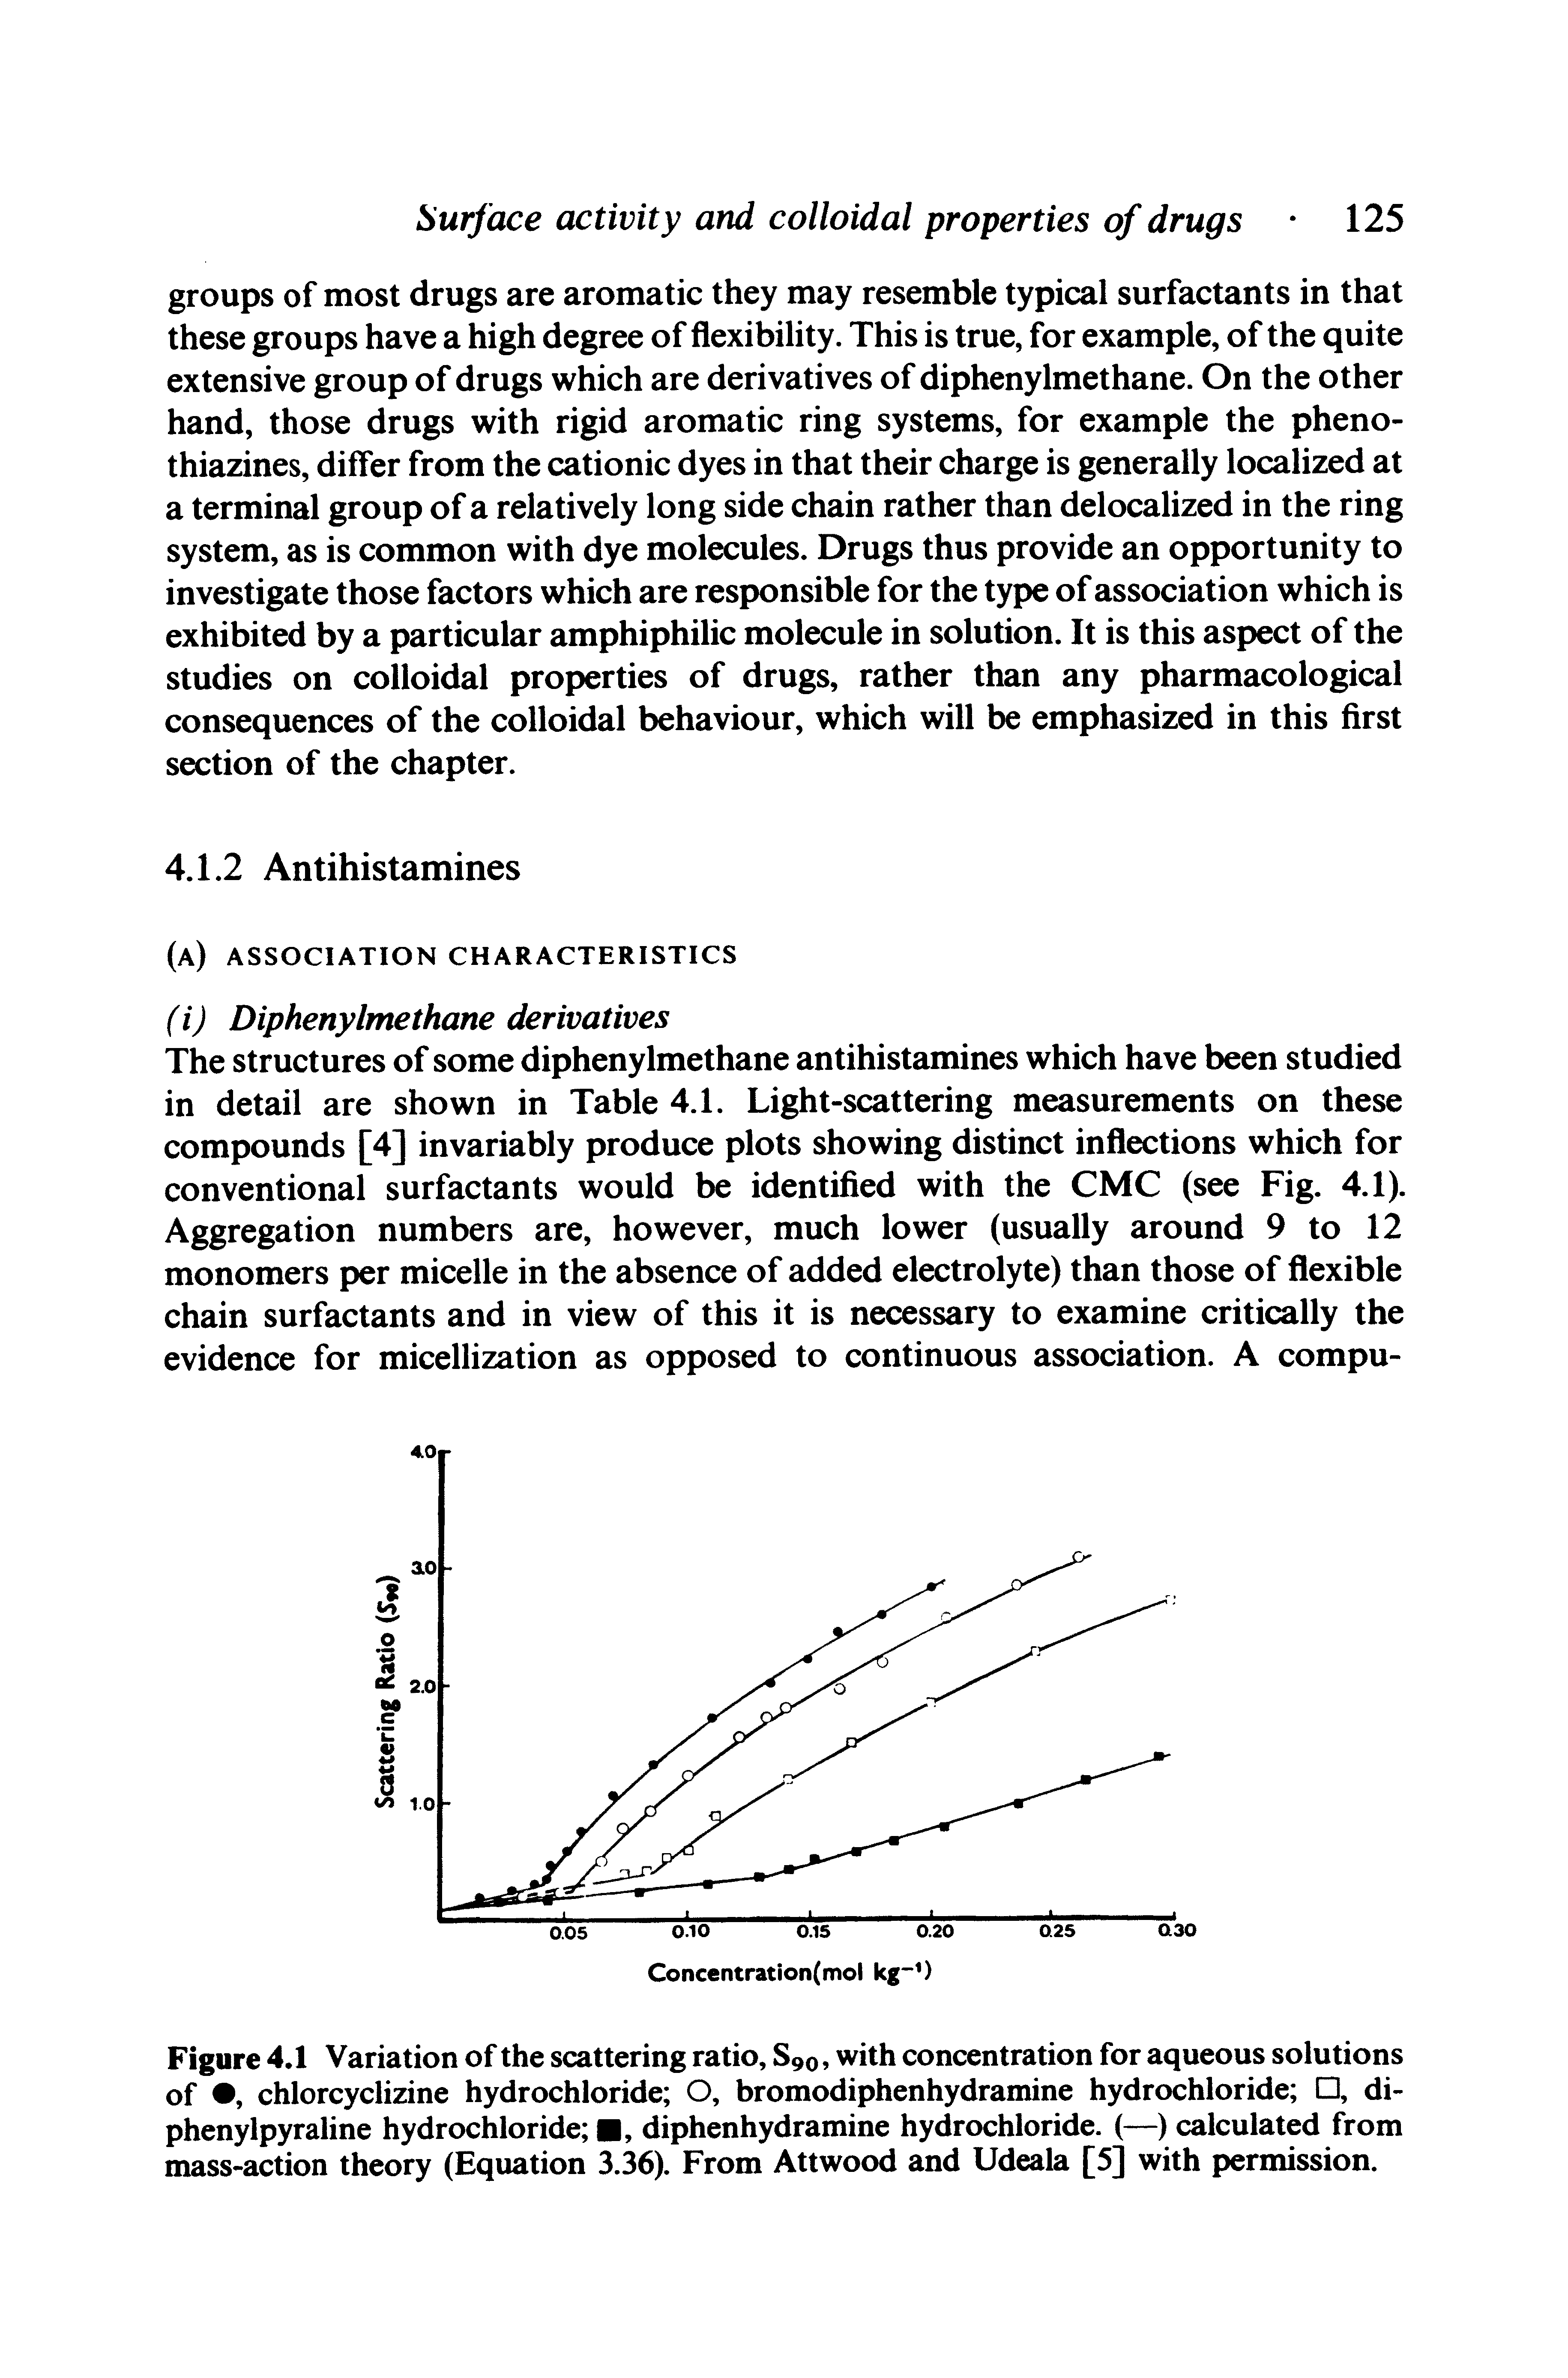 Figure 4.1 Variation of the scattering ratio, Sgo, with concentration for aqueous solutions of , chlorcyclizine hydrochloride O, bromodiphenhydramine hydrochloride , di-phenylpyraline hydrochloride , diphenhydramine hydrochloride. (—) calculated from mass-action theory (Equation 3.36). From Attwood and Udeala [5] with permission.